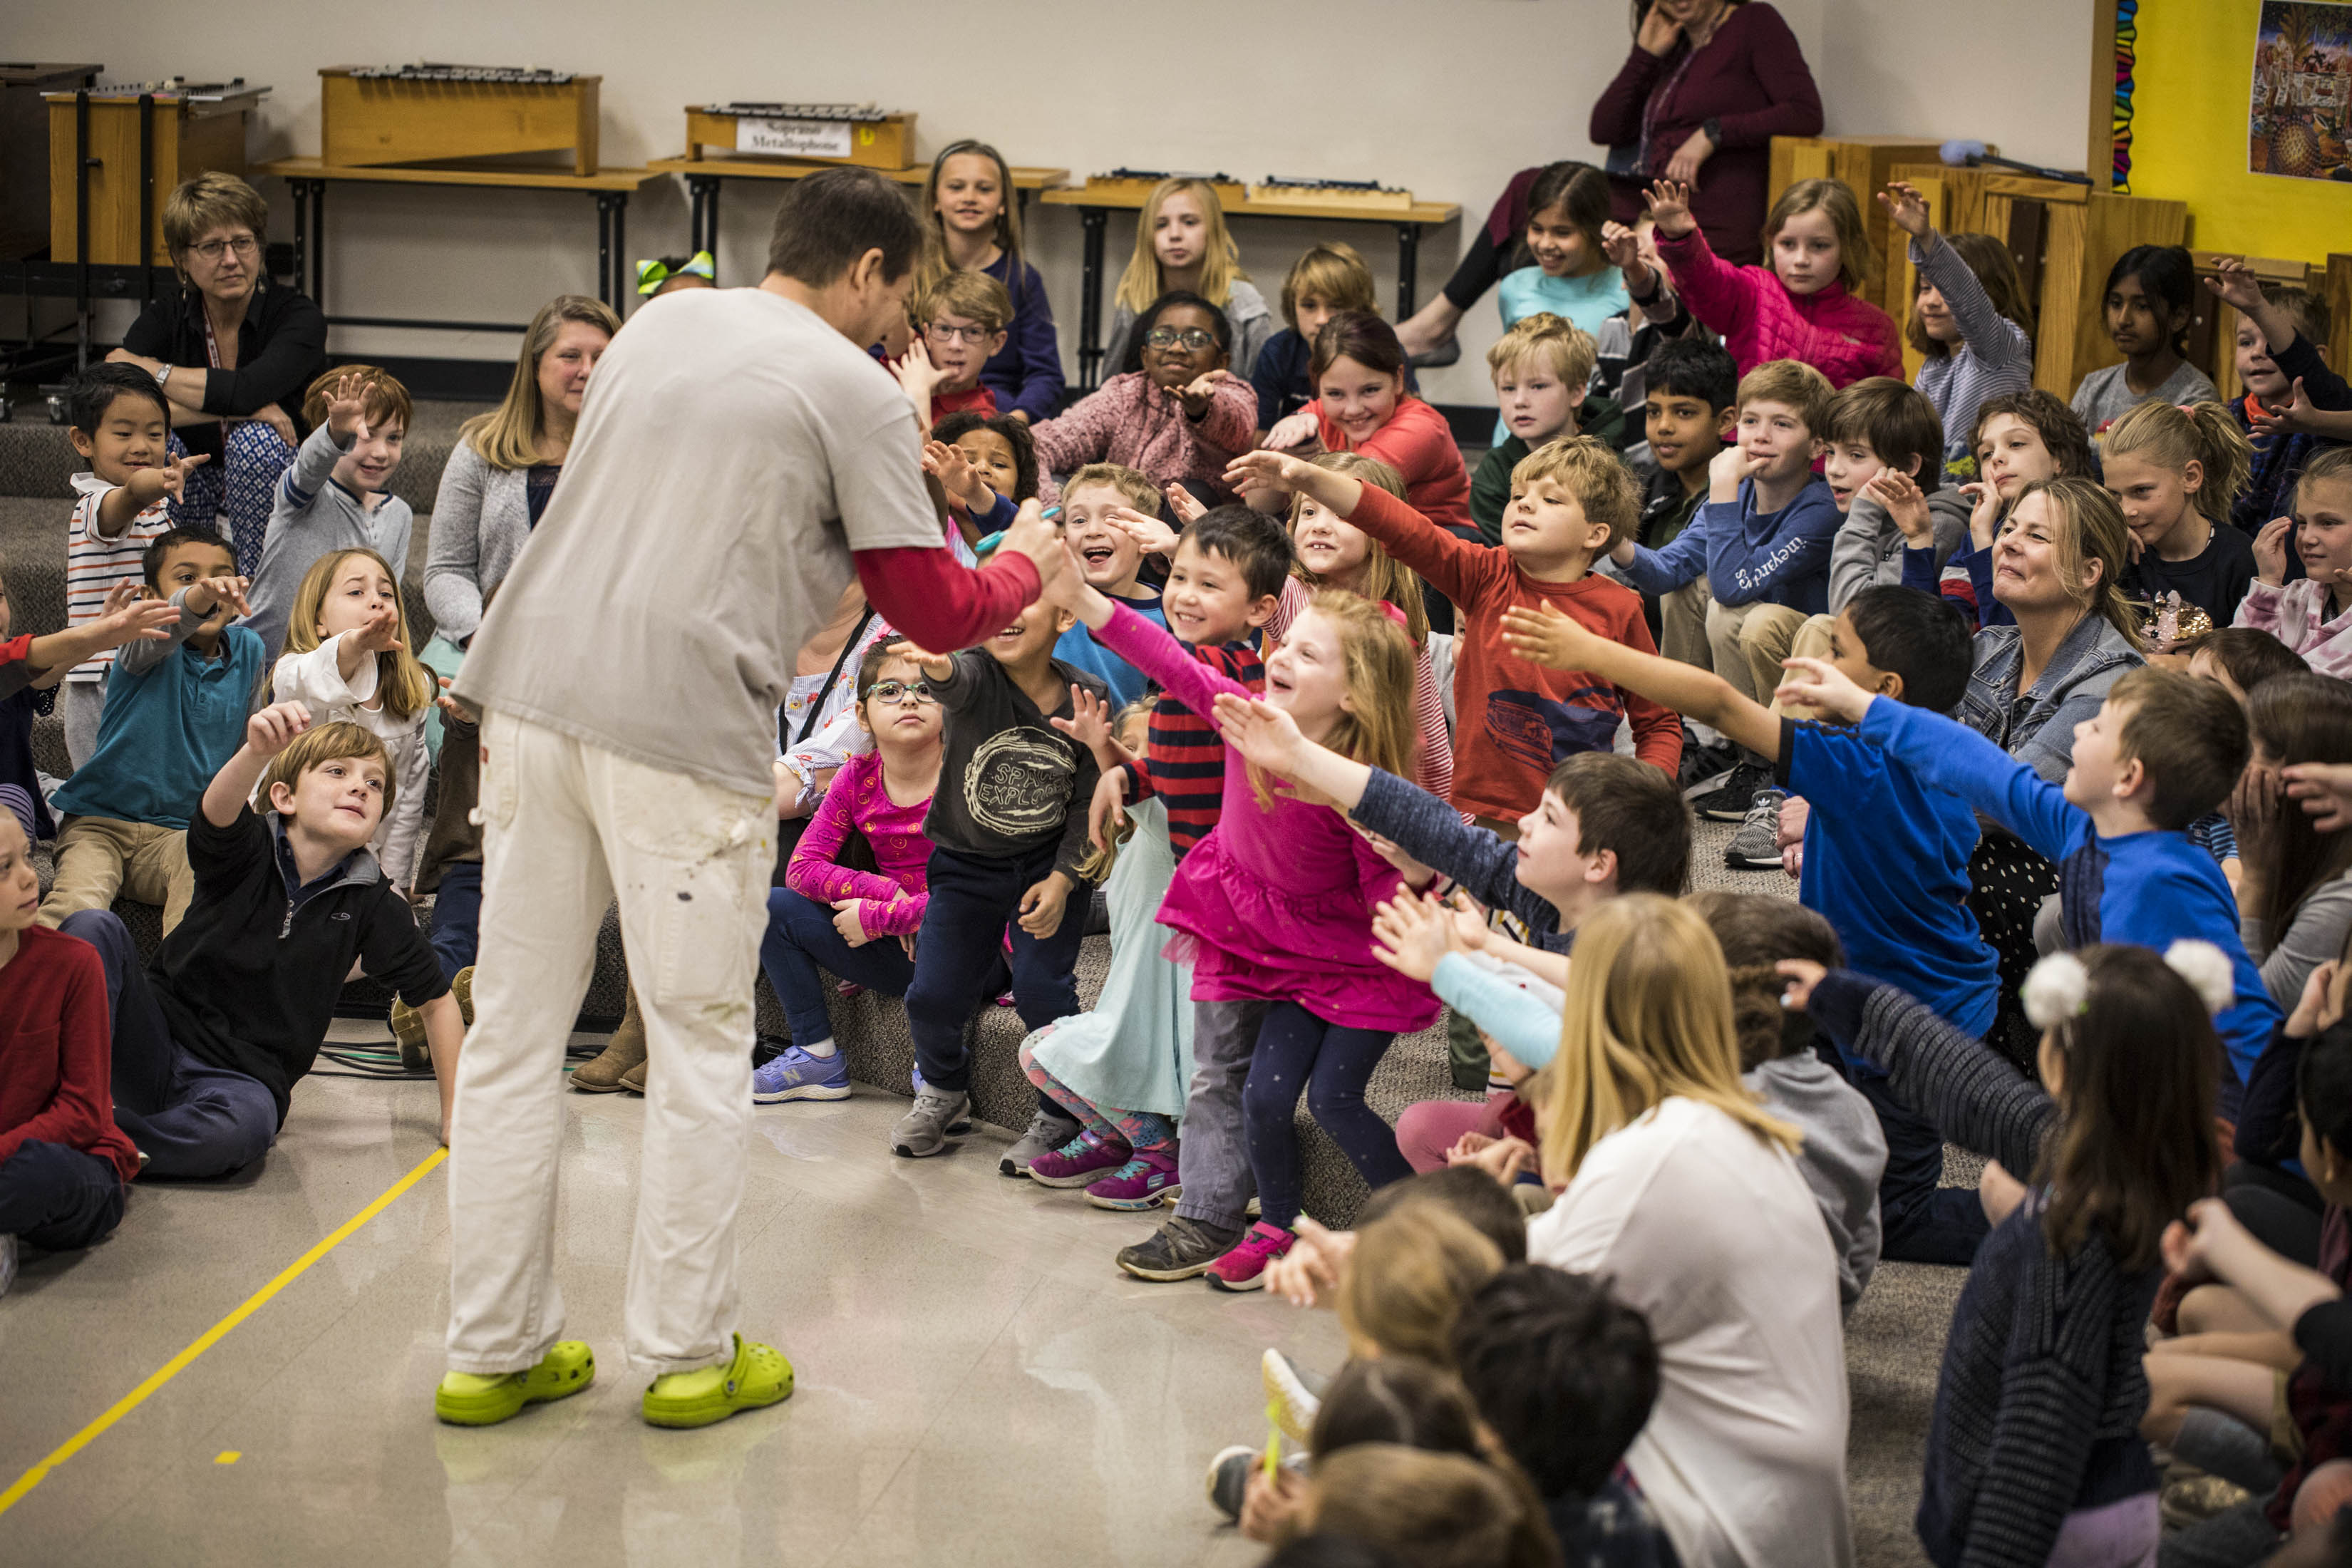 Kirkwood artist Mark Borella visited the MICDS Lower School to share Seeds of Happiness.